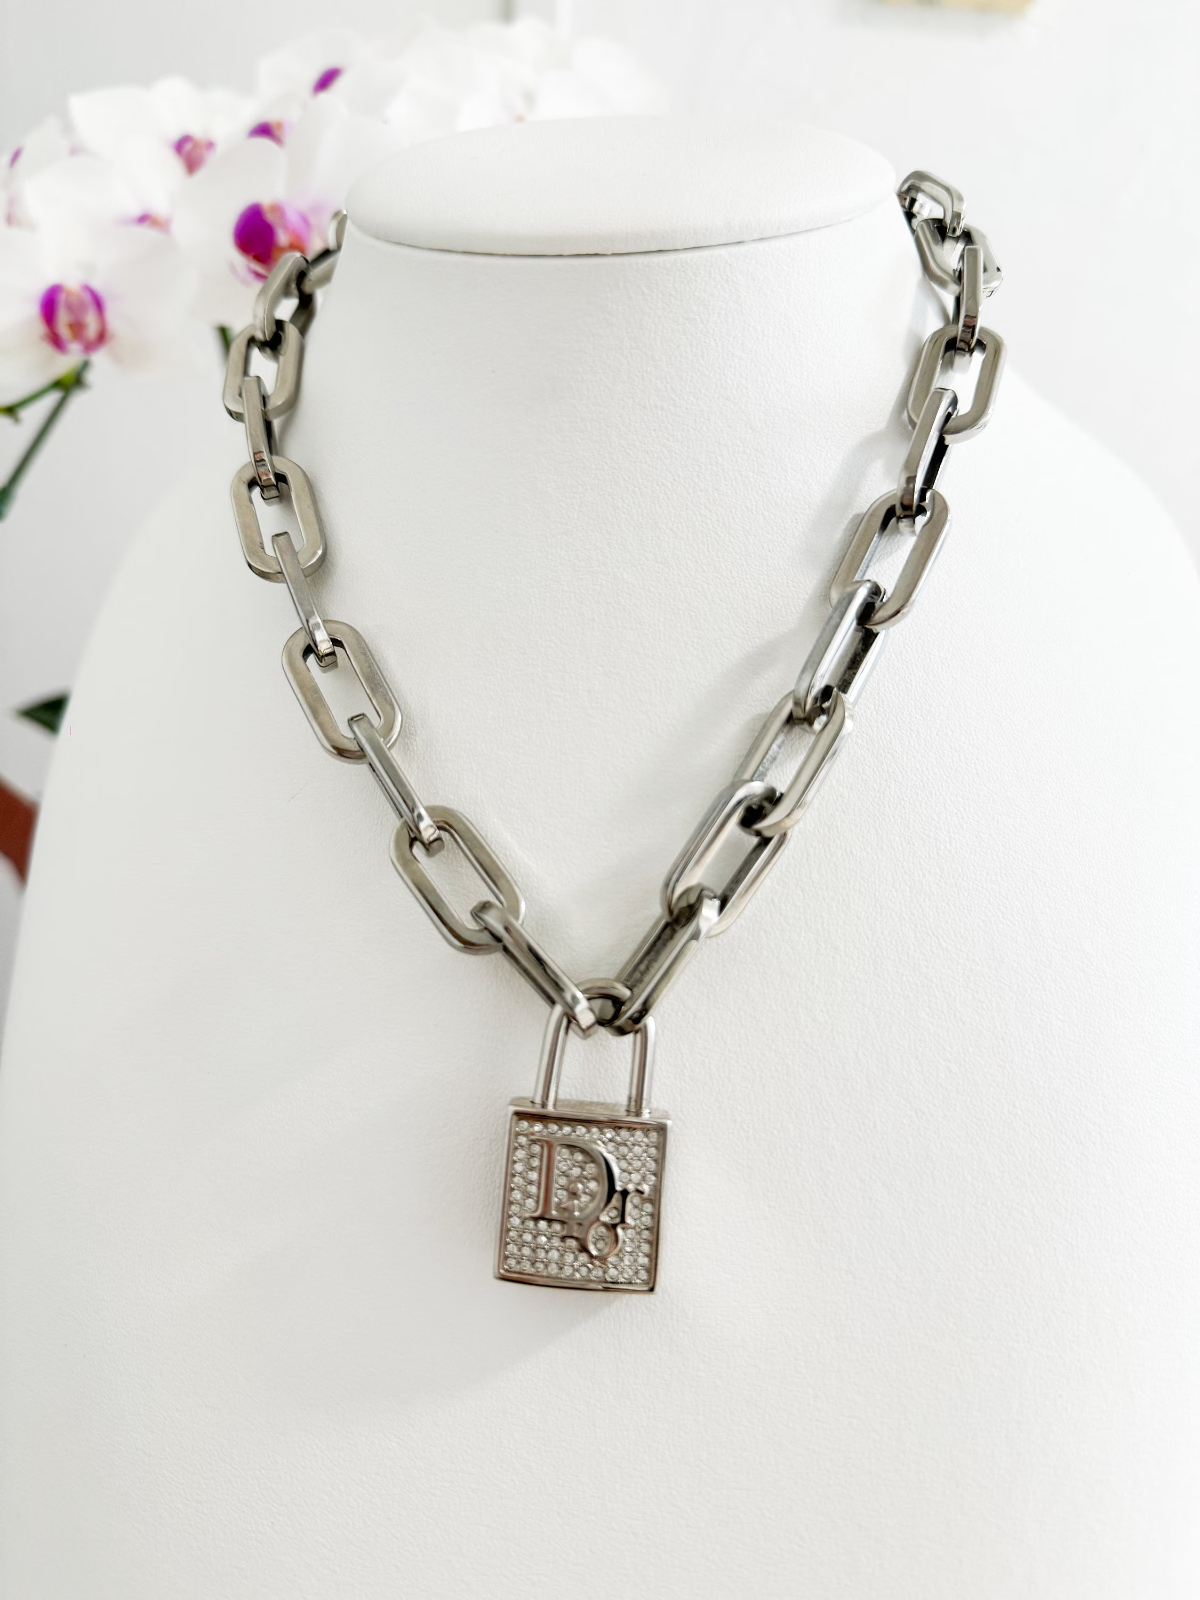 Vintage Christian Dior chunky choker Padlock key,  Chain Necklace, Silver Tone Chain Necklace , Vintage Costume Jewelry, Necklace Large